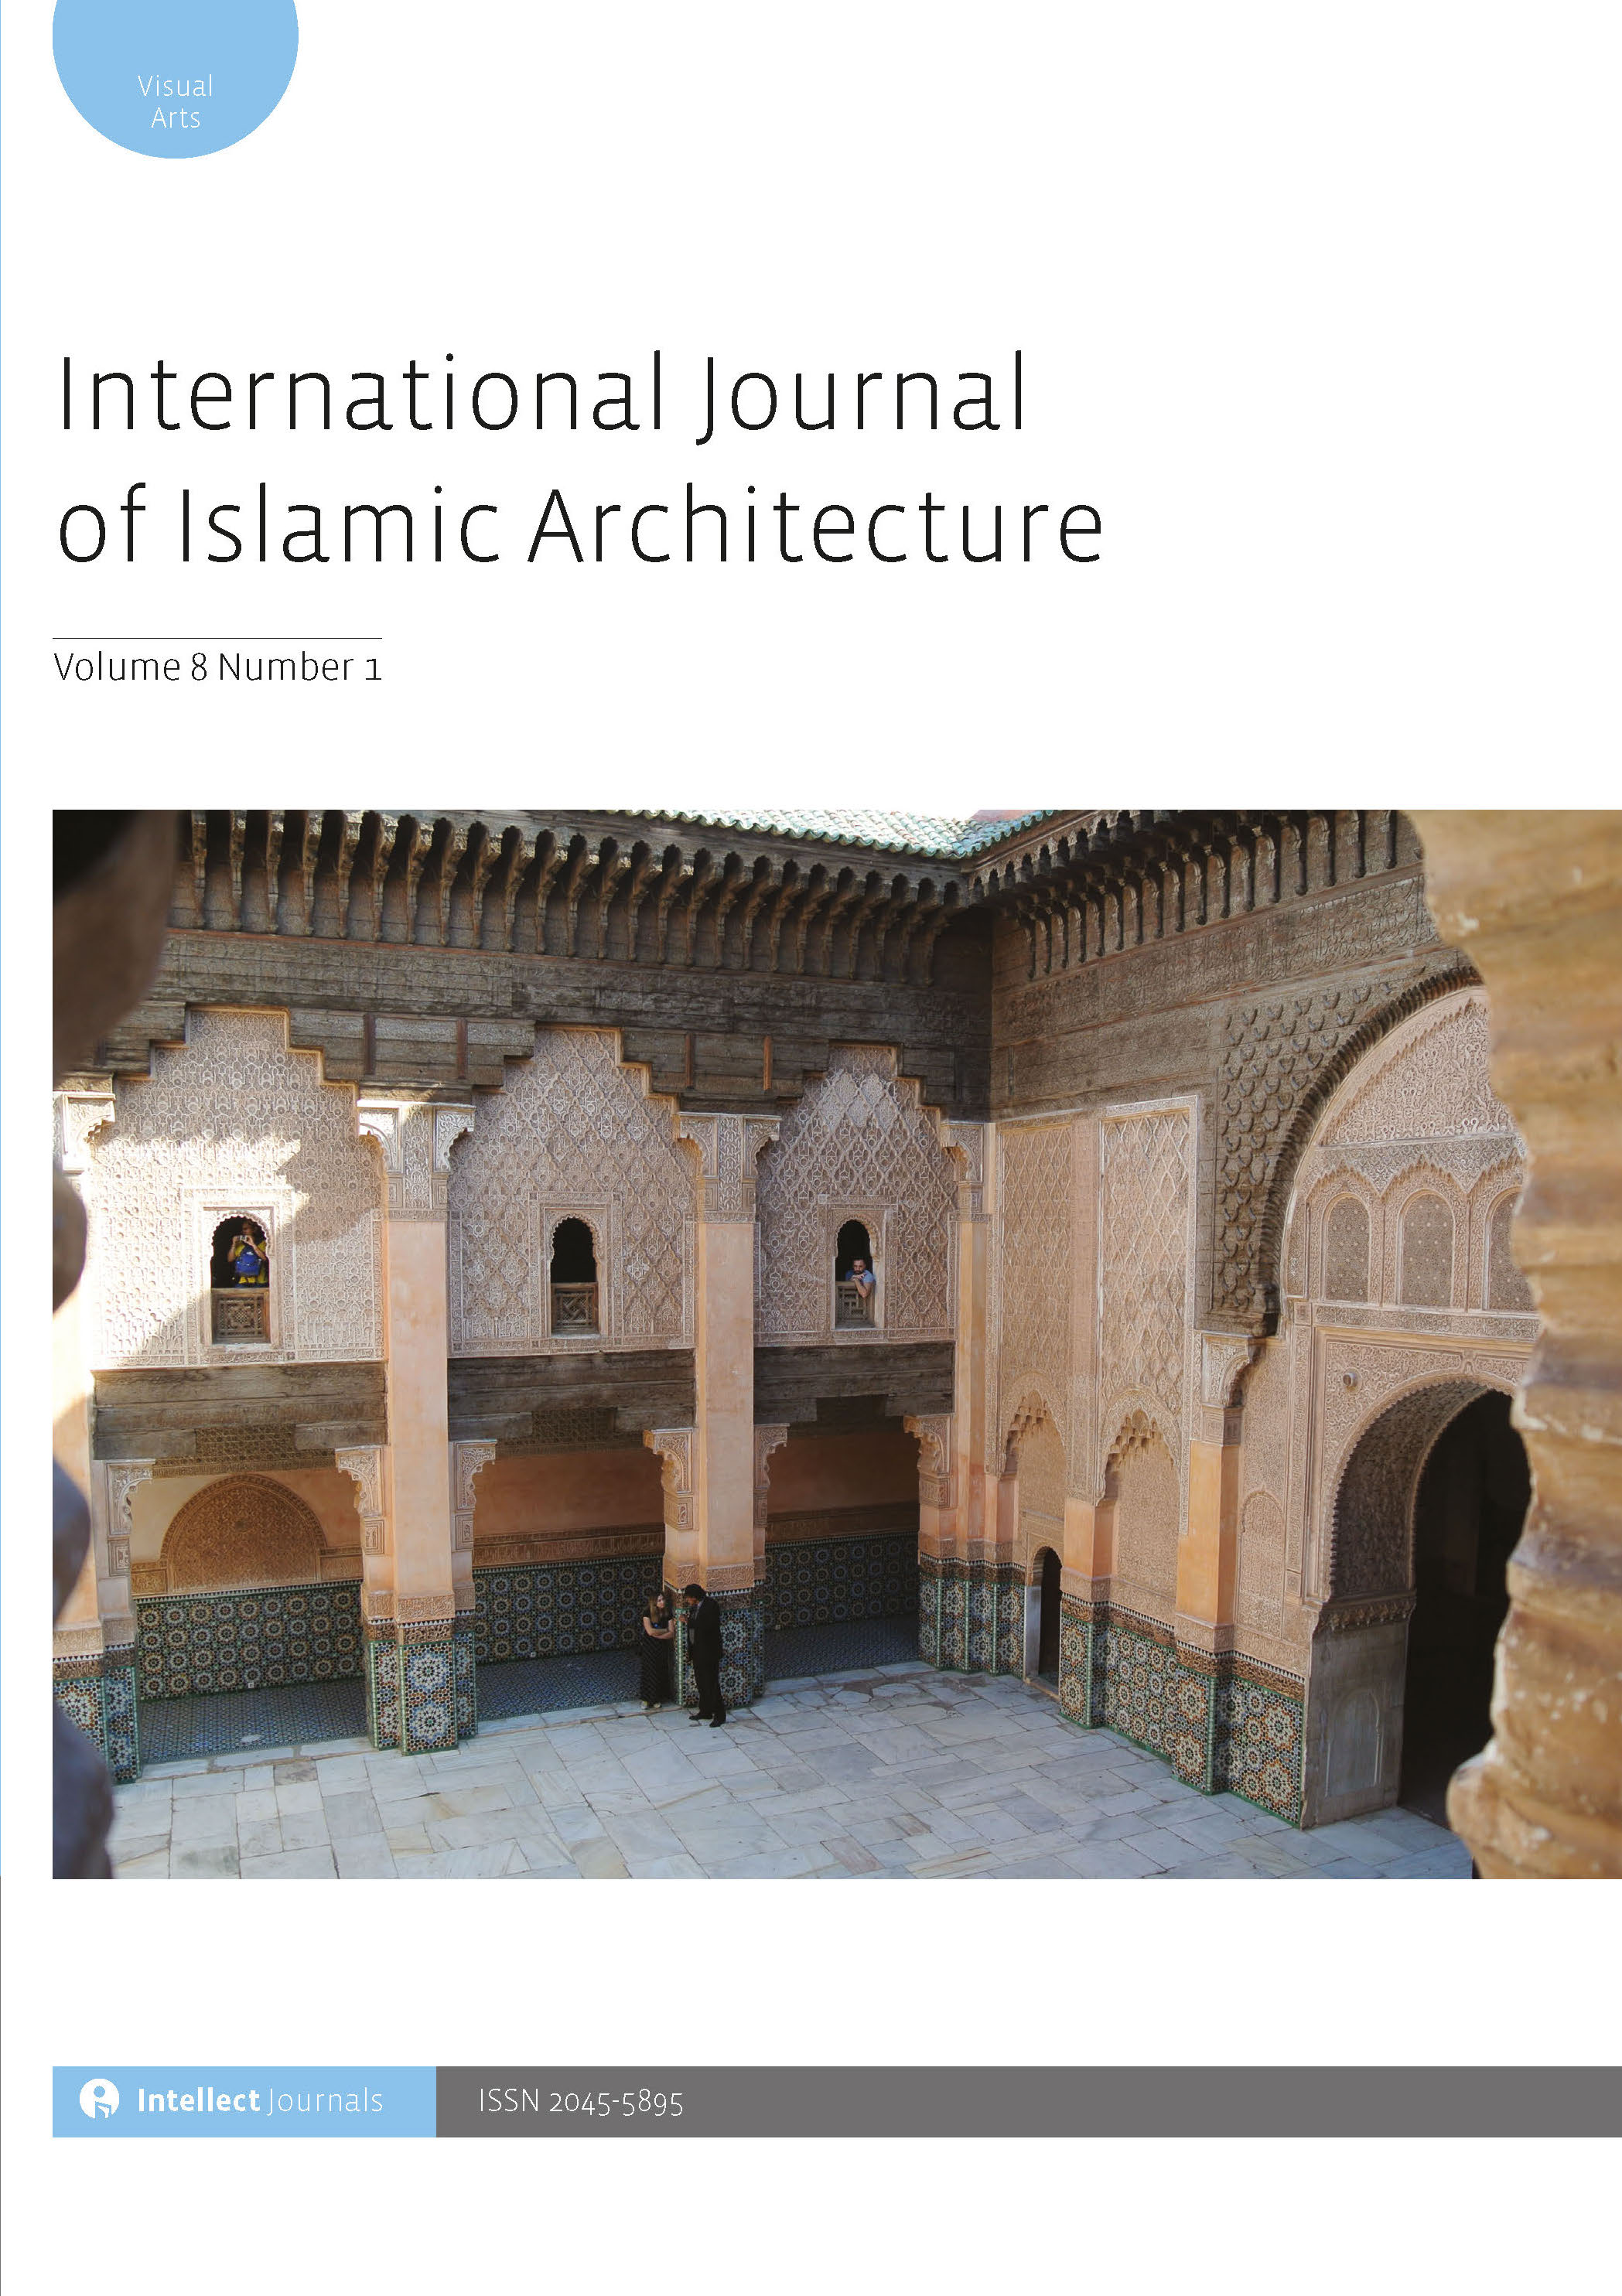 Ashkan Rezvani-Naraghi - This article demonstrates how the production of an architectural discourse through the works of nineteenth-century European travellers and orientalists has had a long-term effect on the studies of takiyeh spaces in Iranian cities, where mourning ceremonies were held during the month of Muharram. By analysing takiyehs as fluid social spaces, rather than as fixed architectural sites, this article argues that the co-presence of social relations was the main criterion for the production of takiyehs and the physical and architectural manifestations were the byproducts of the sociality of spaces. Moreover, it shows that the Royal Takiyeh of Tehran, Takiyeh Dowlat, became a flexible sociopolitical concept that had various architectural manifestations in different times. In contrast to the general assumption that a giant circular building in late nineteenth-century Tehran constituted the sole takiyeh dowlat, this article argues that takiyeh dowlat was a well-established sociopolitical practice that can be traced back to the early nineteenth century. Through these investigations, this article suggests that instead of applying foreign architectural discourses to nineteenth-century Iran, social analysis provides an alternative framework for understanding social spaces in nineteenth-century Iranian cities.<div><br></div><div>Keywords:&nbsp;Qajar; Takiyeh Dowlat; Tehran; architectural discourse; social space; takiyeh</div>